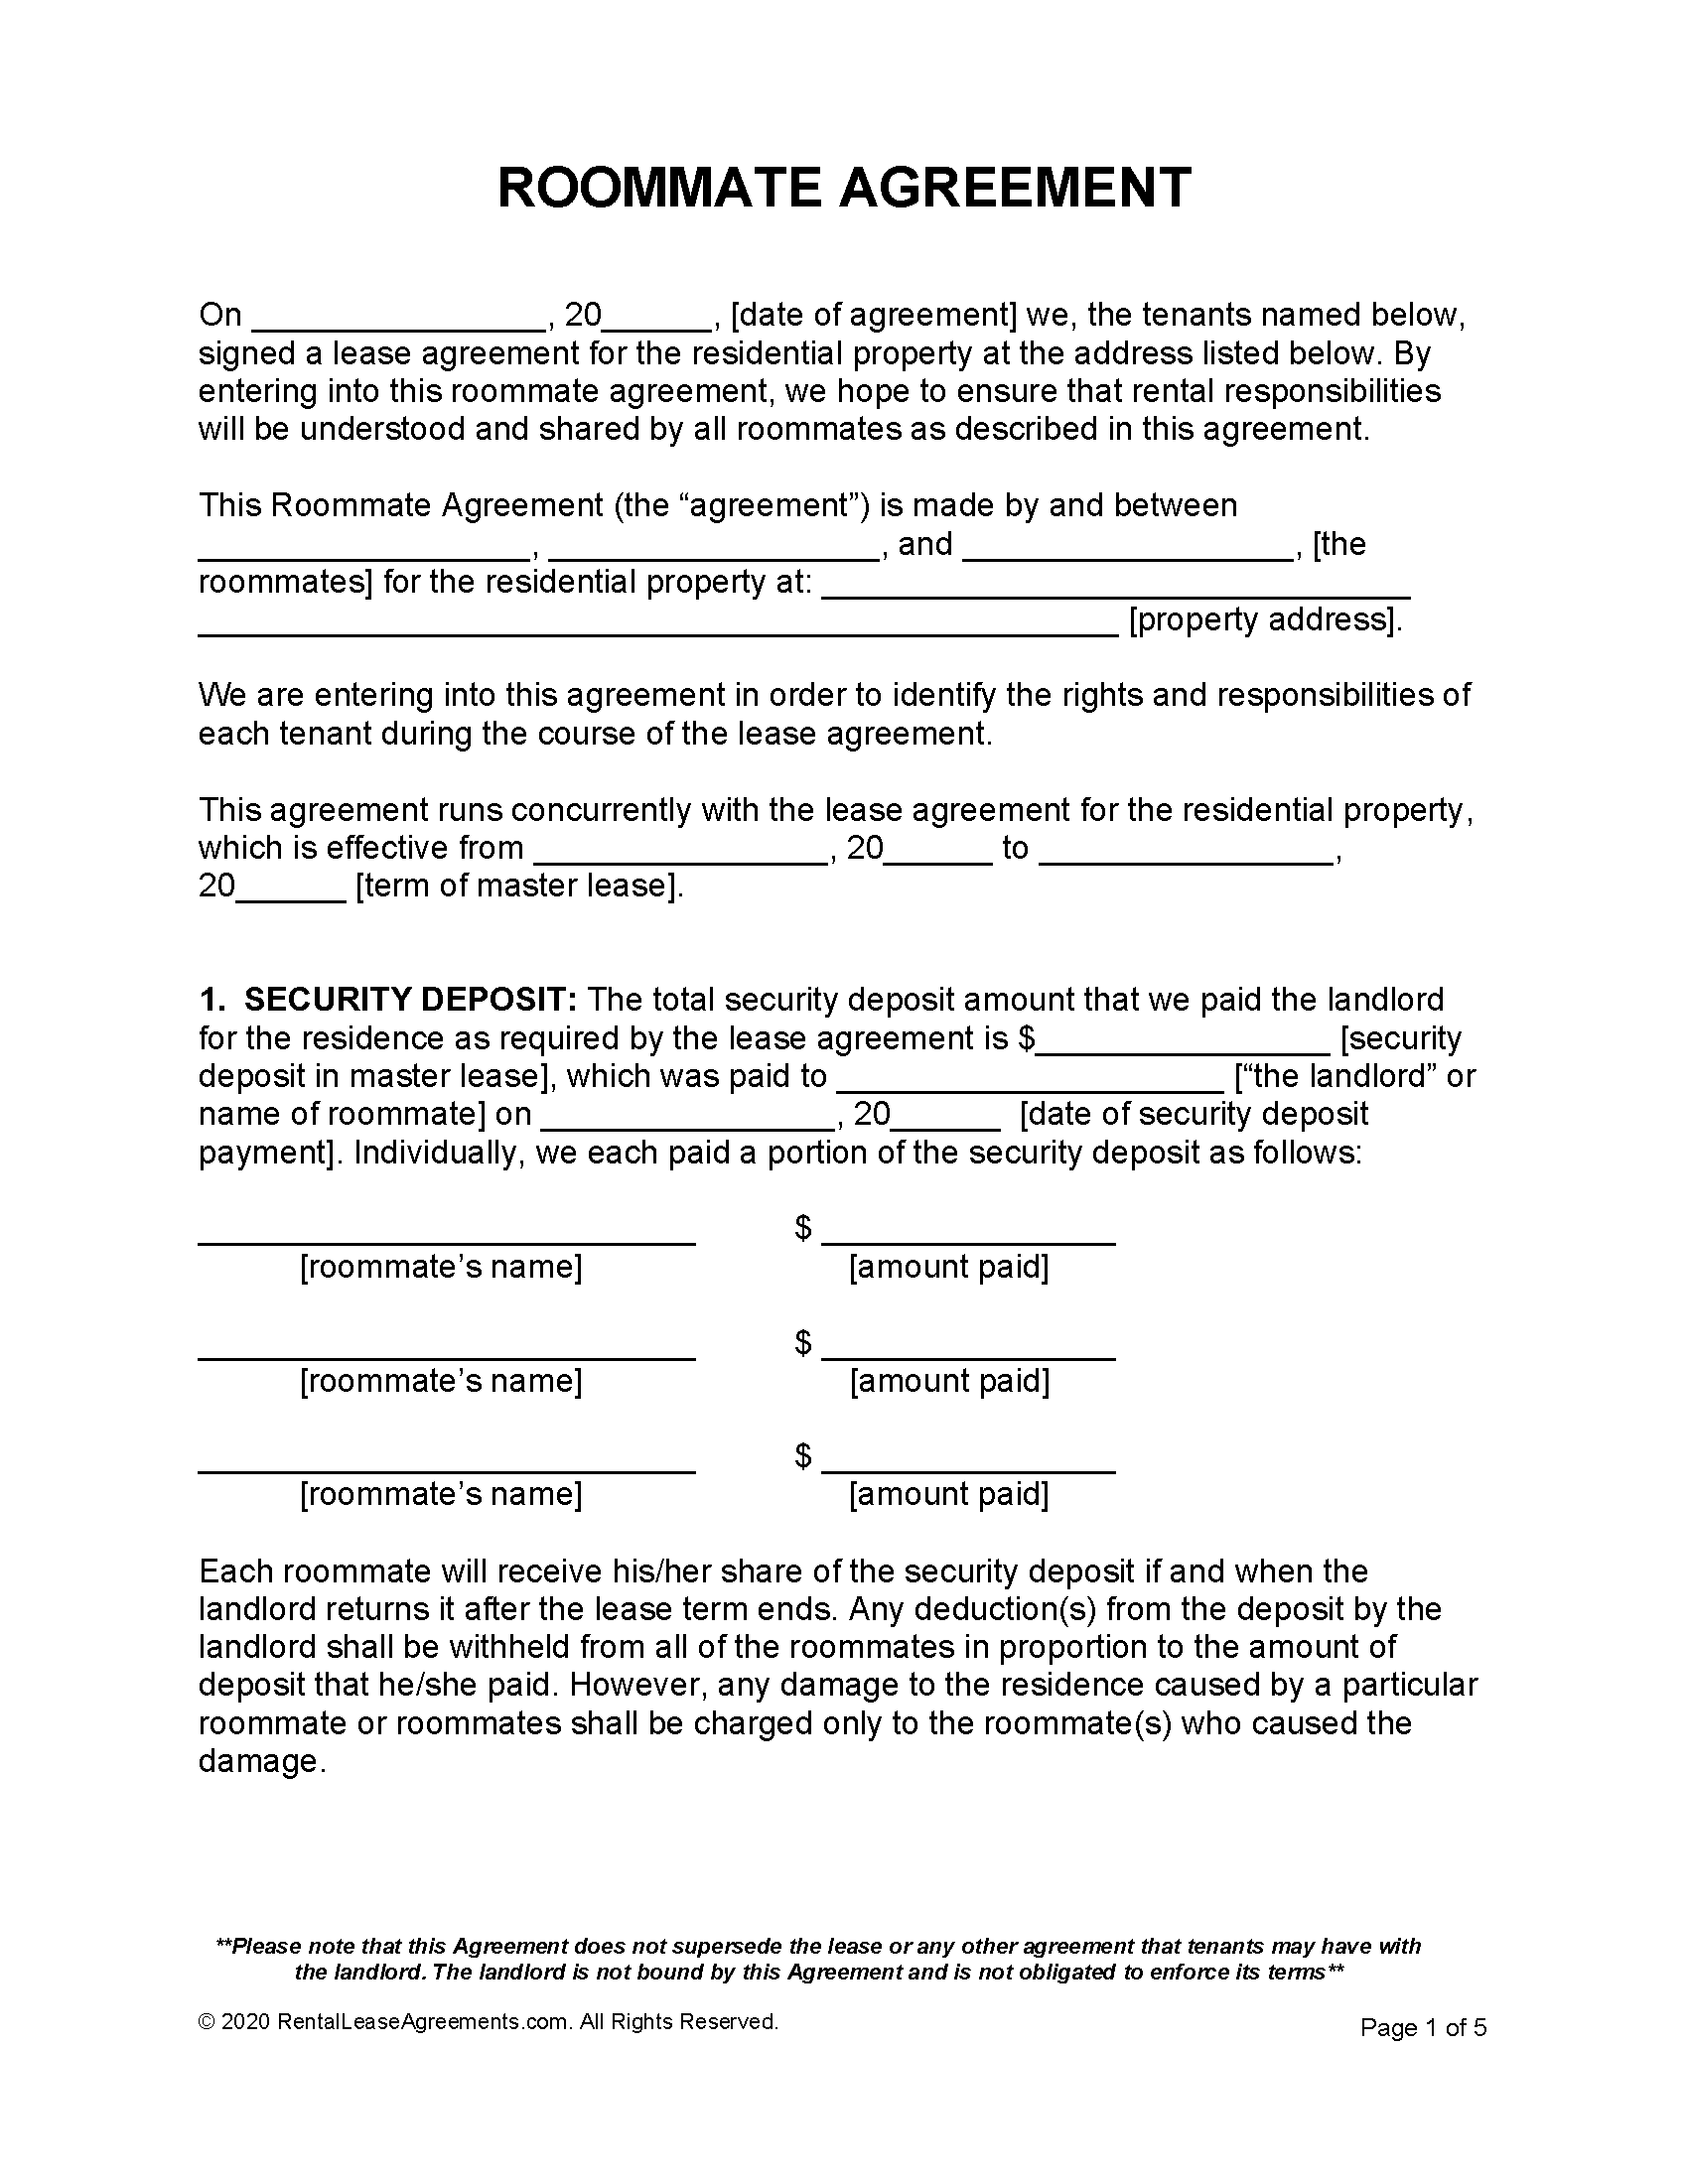 Free Roommate Agreement Template  PDF - Word Regarding net 30 terms agreement template